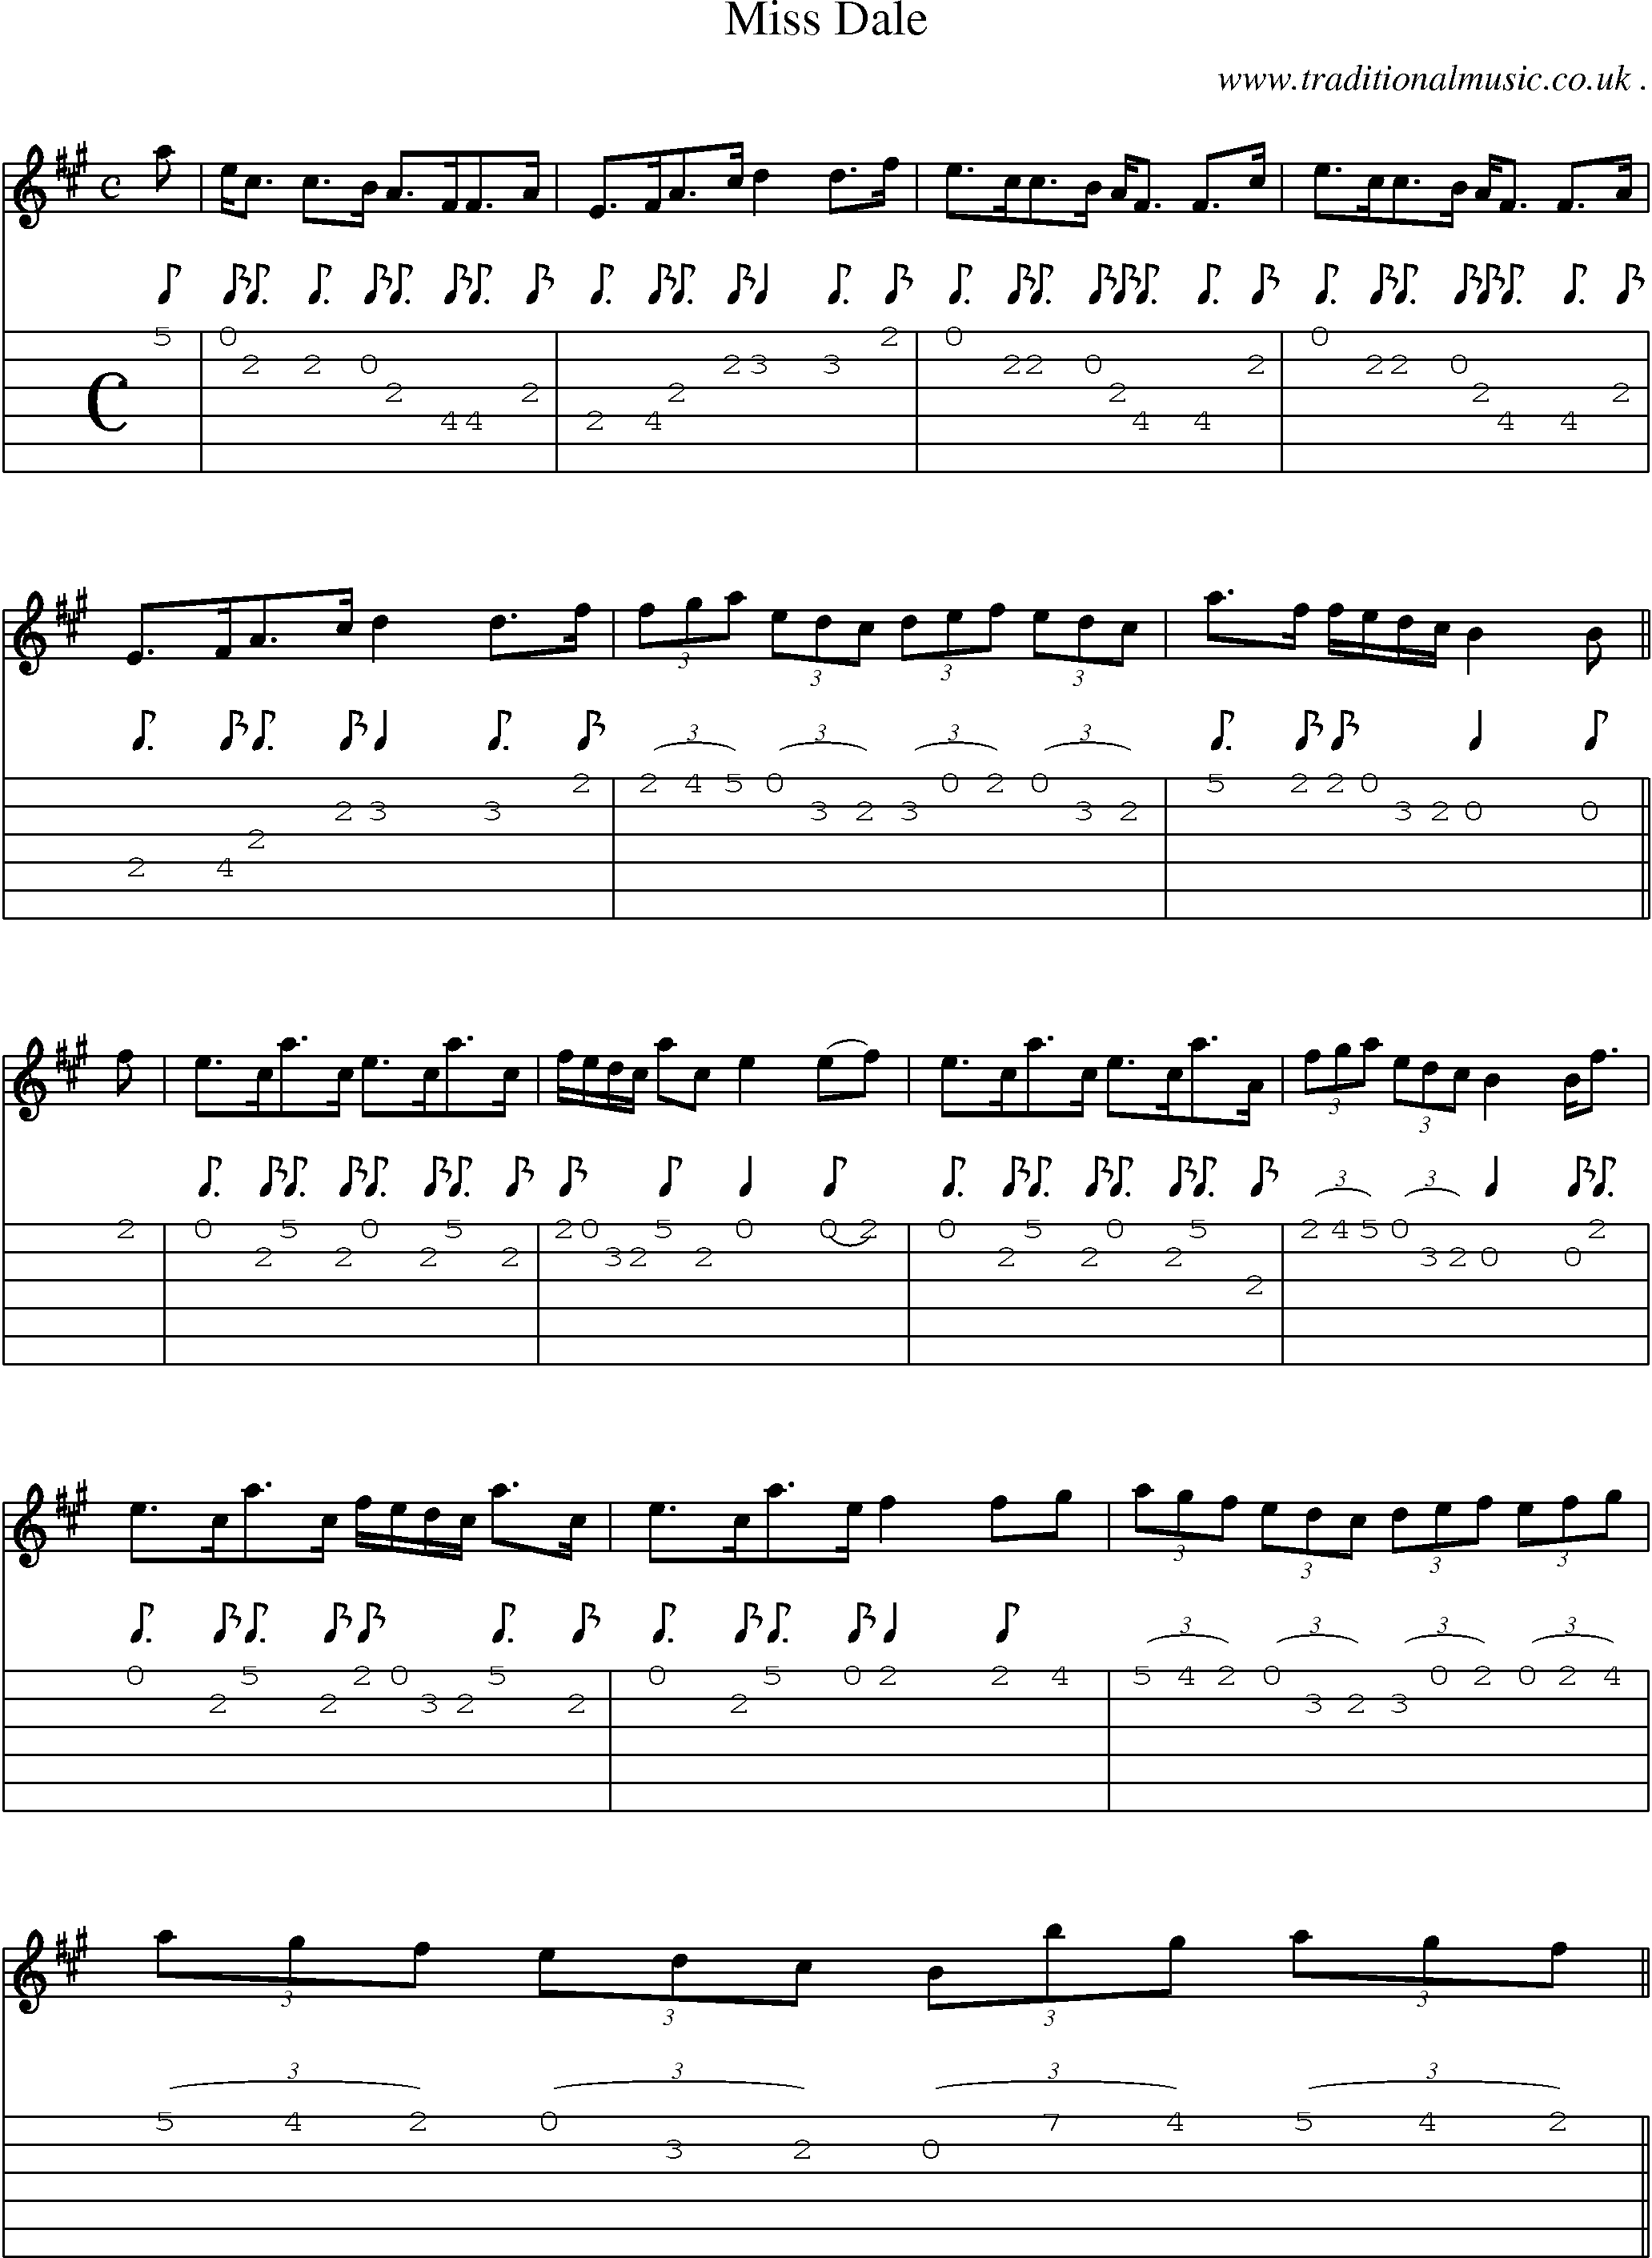 Sheet-music  score, Chords and Guitar Tabs for Miss Dale